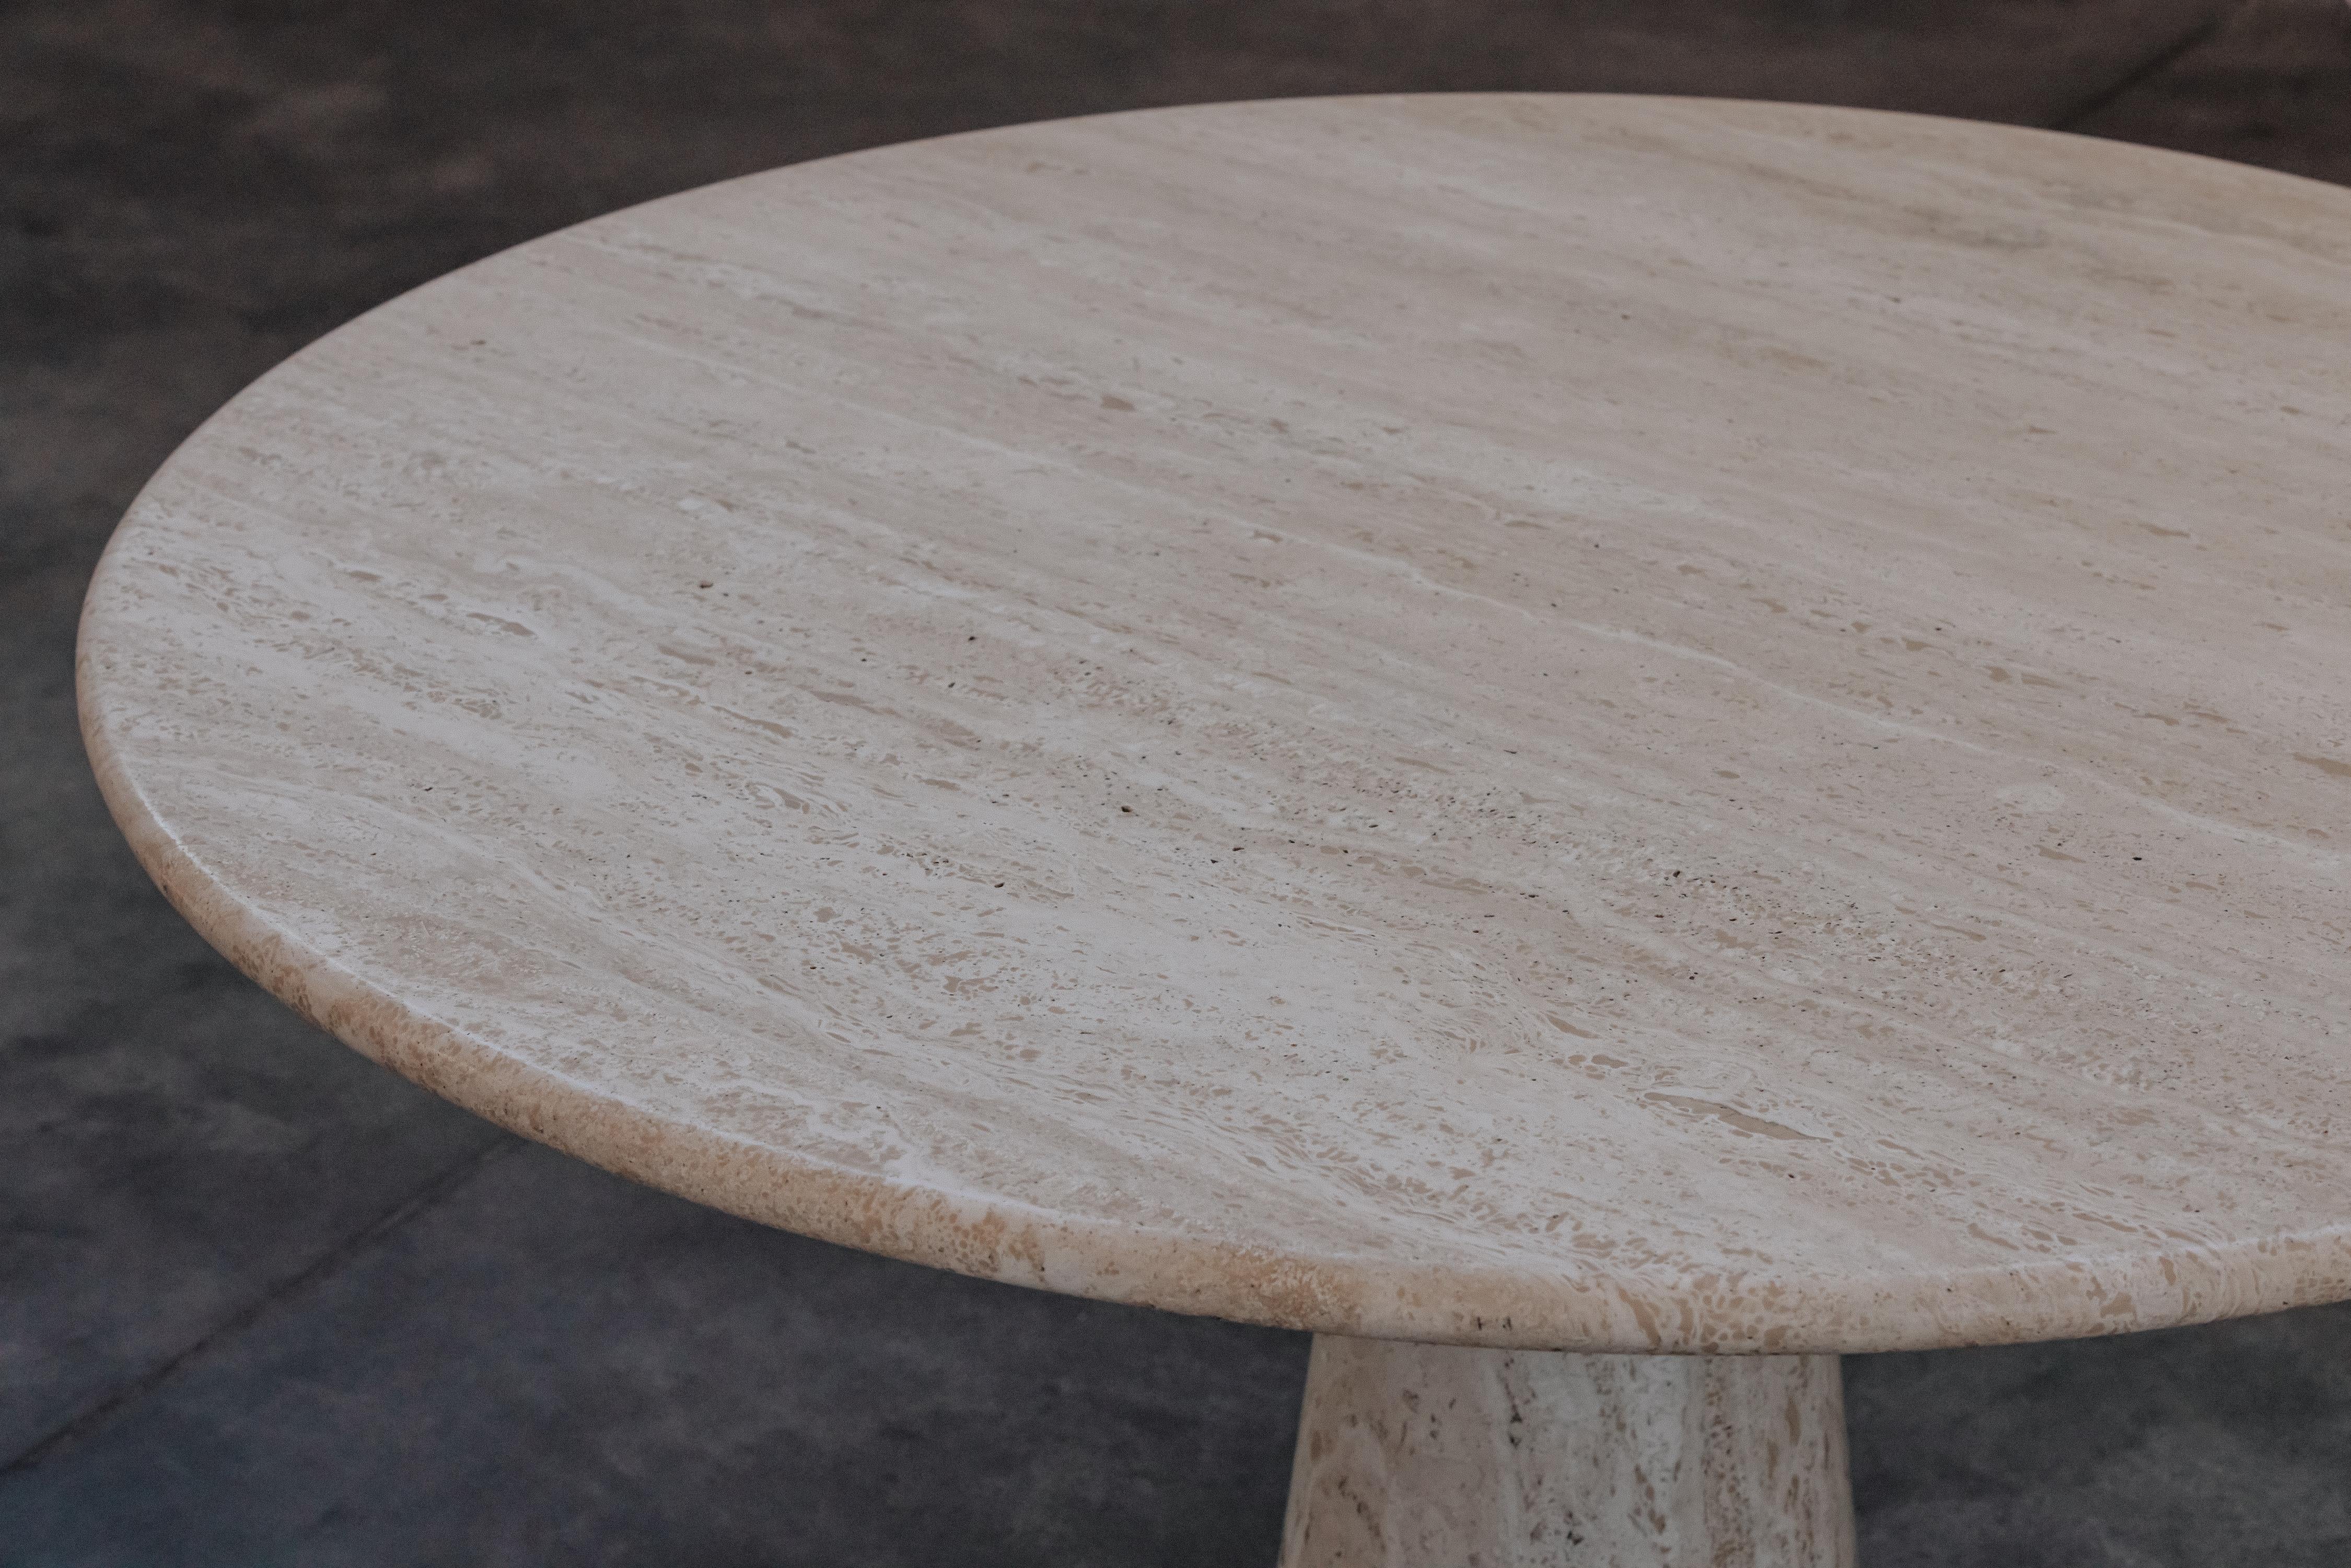 Vintage Travertine Dining Table From Italy, Circa 1970.  Solid travertine construction.  Excellent condition.